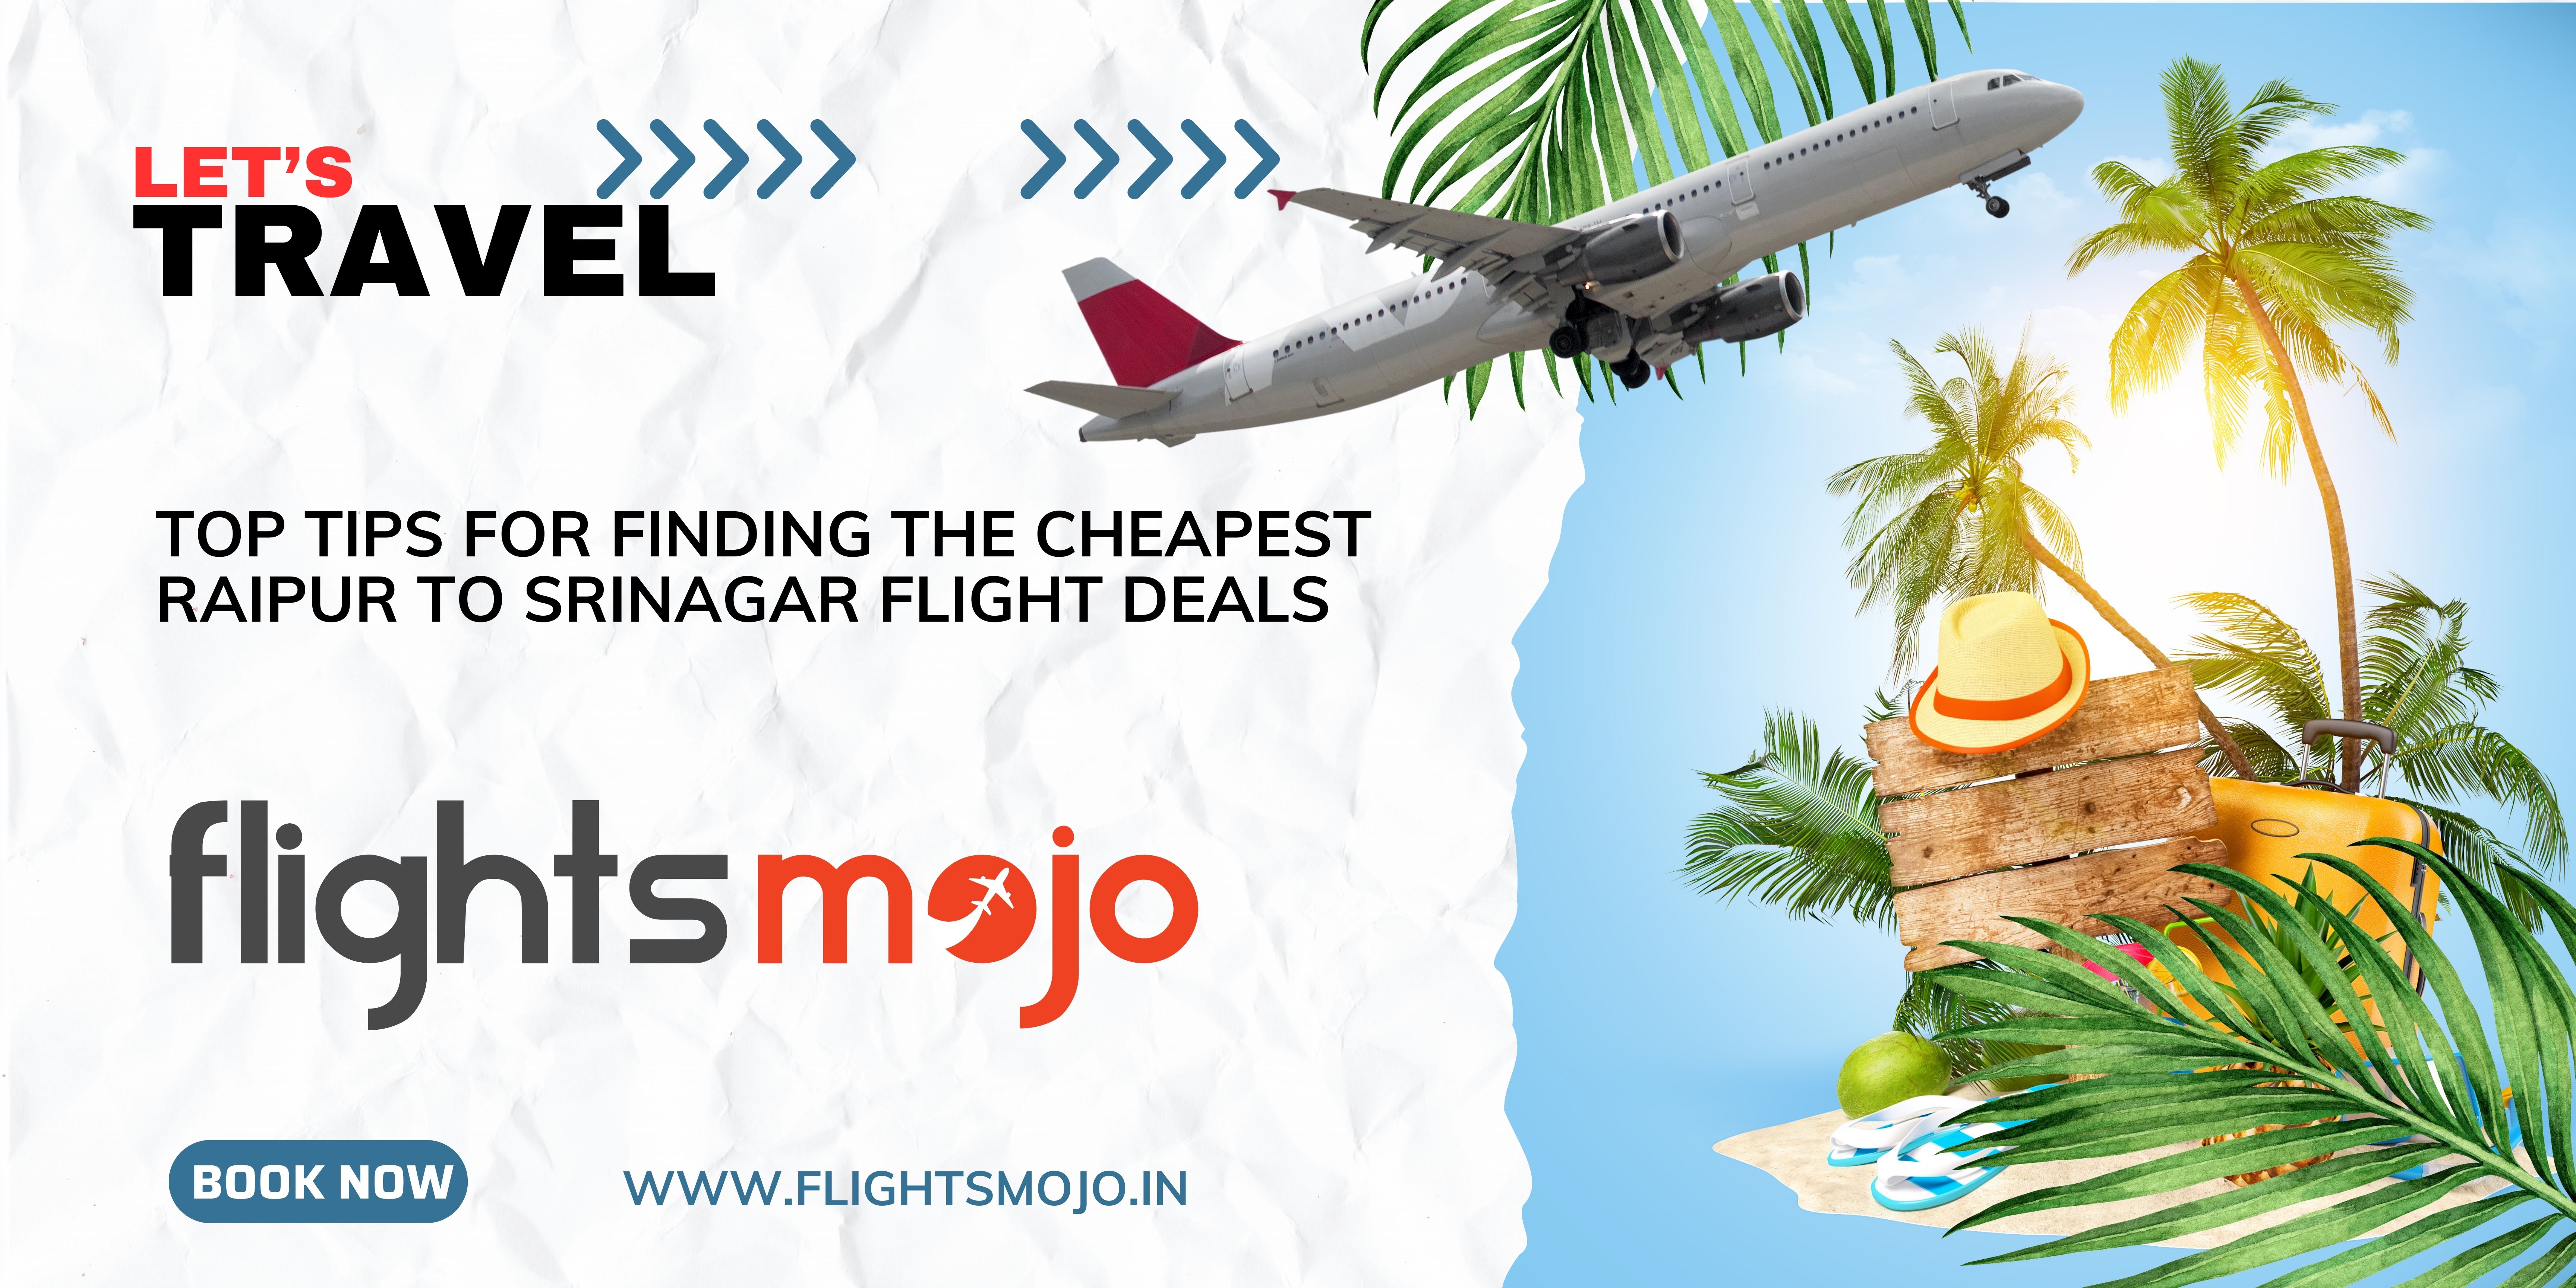 Top Tips for Finding the Cheapest Raipur to Srinagar Flight Deals – Cheapest Last Minute Flights